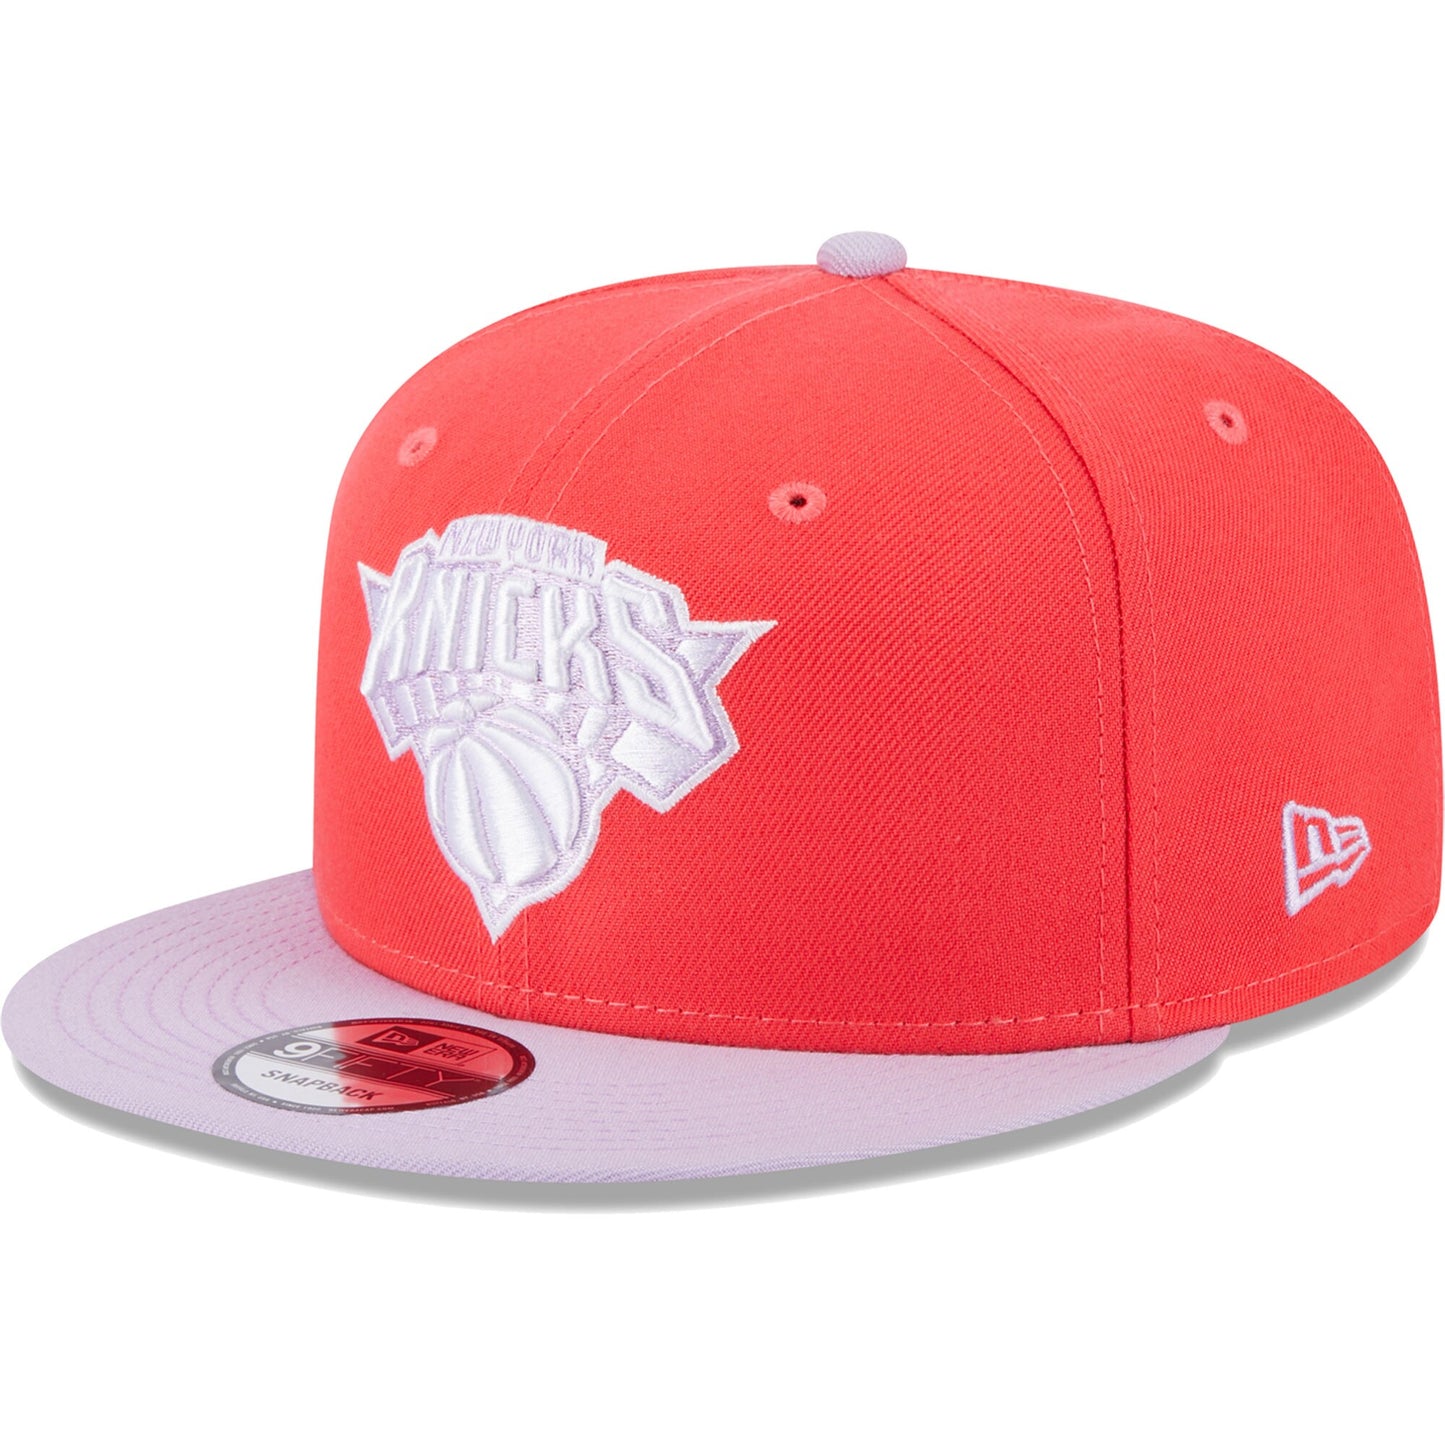 New York Knicks New Era 2-Tone Color Pack 9FIFTY Snapback Hat - Red/Lavender